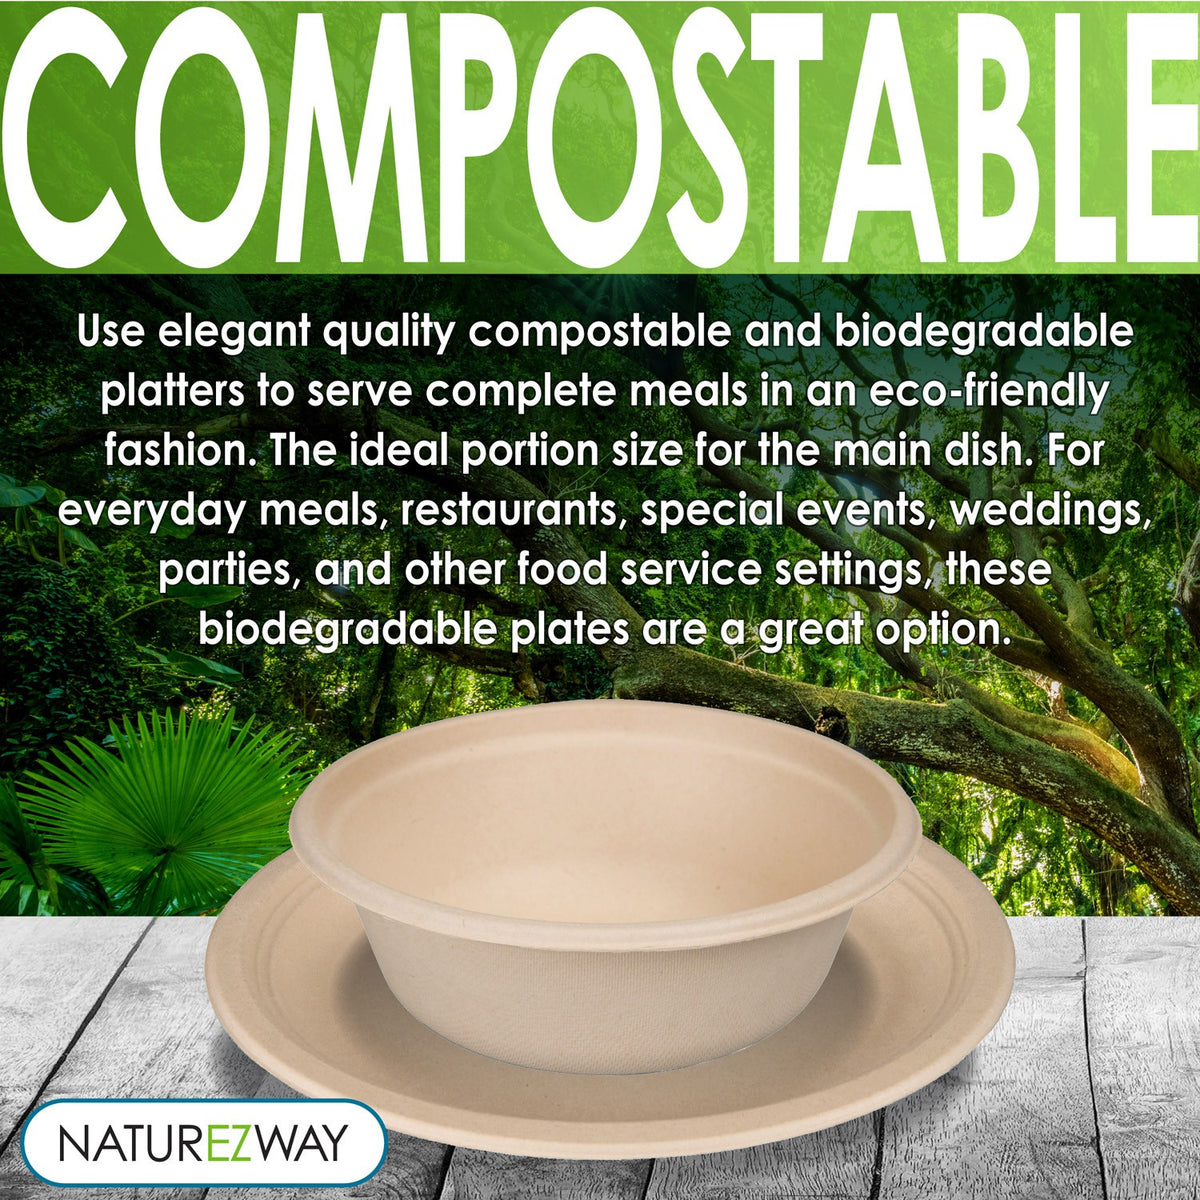 Compostable 10 Inch Disposable Paper Plates, Heavy Duty Sugarcane Fiber  Plate Biodegradable Soak Proof For Daily Meals, Parties, Bbq -50 Count